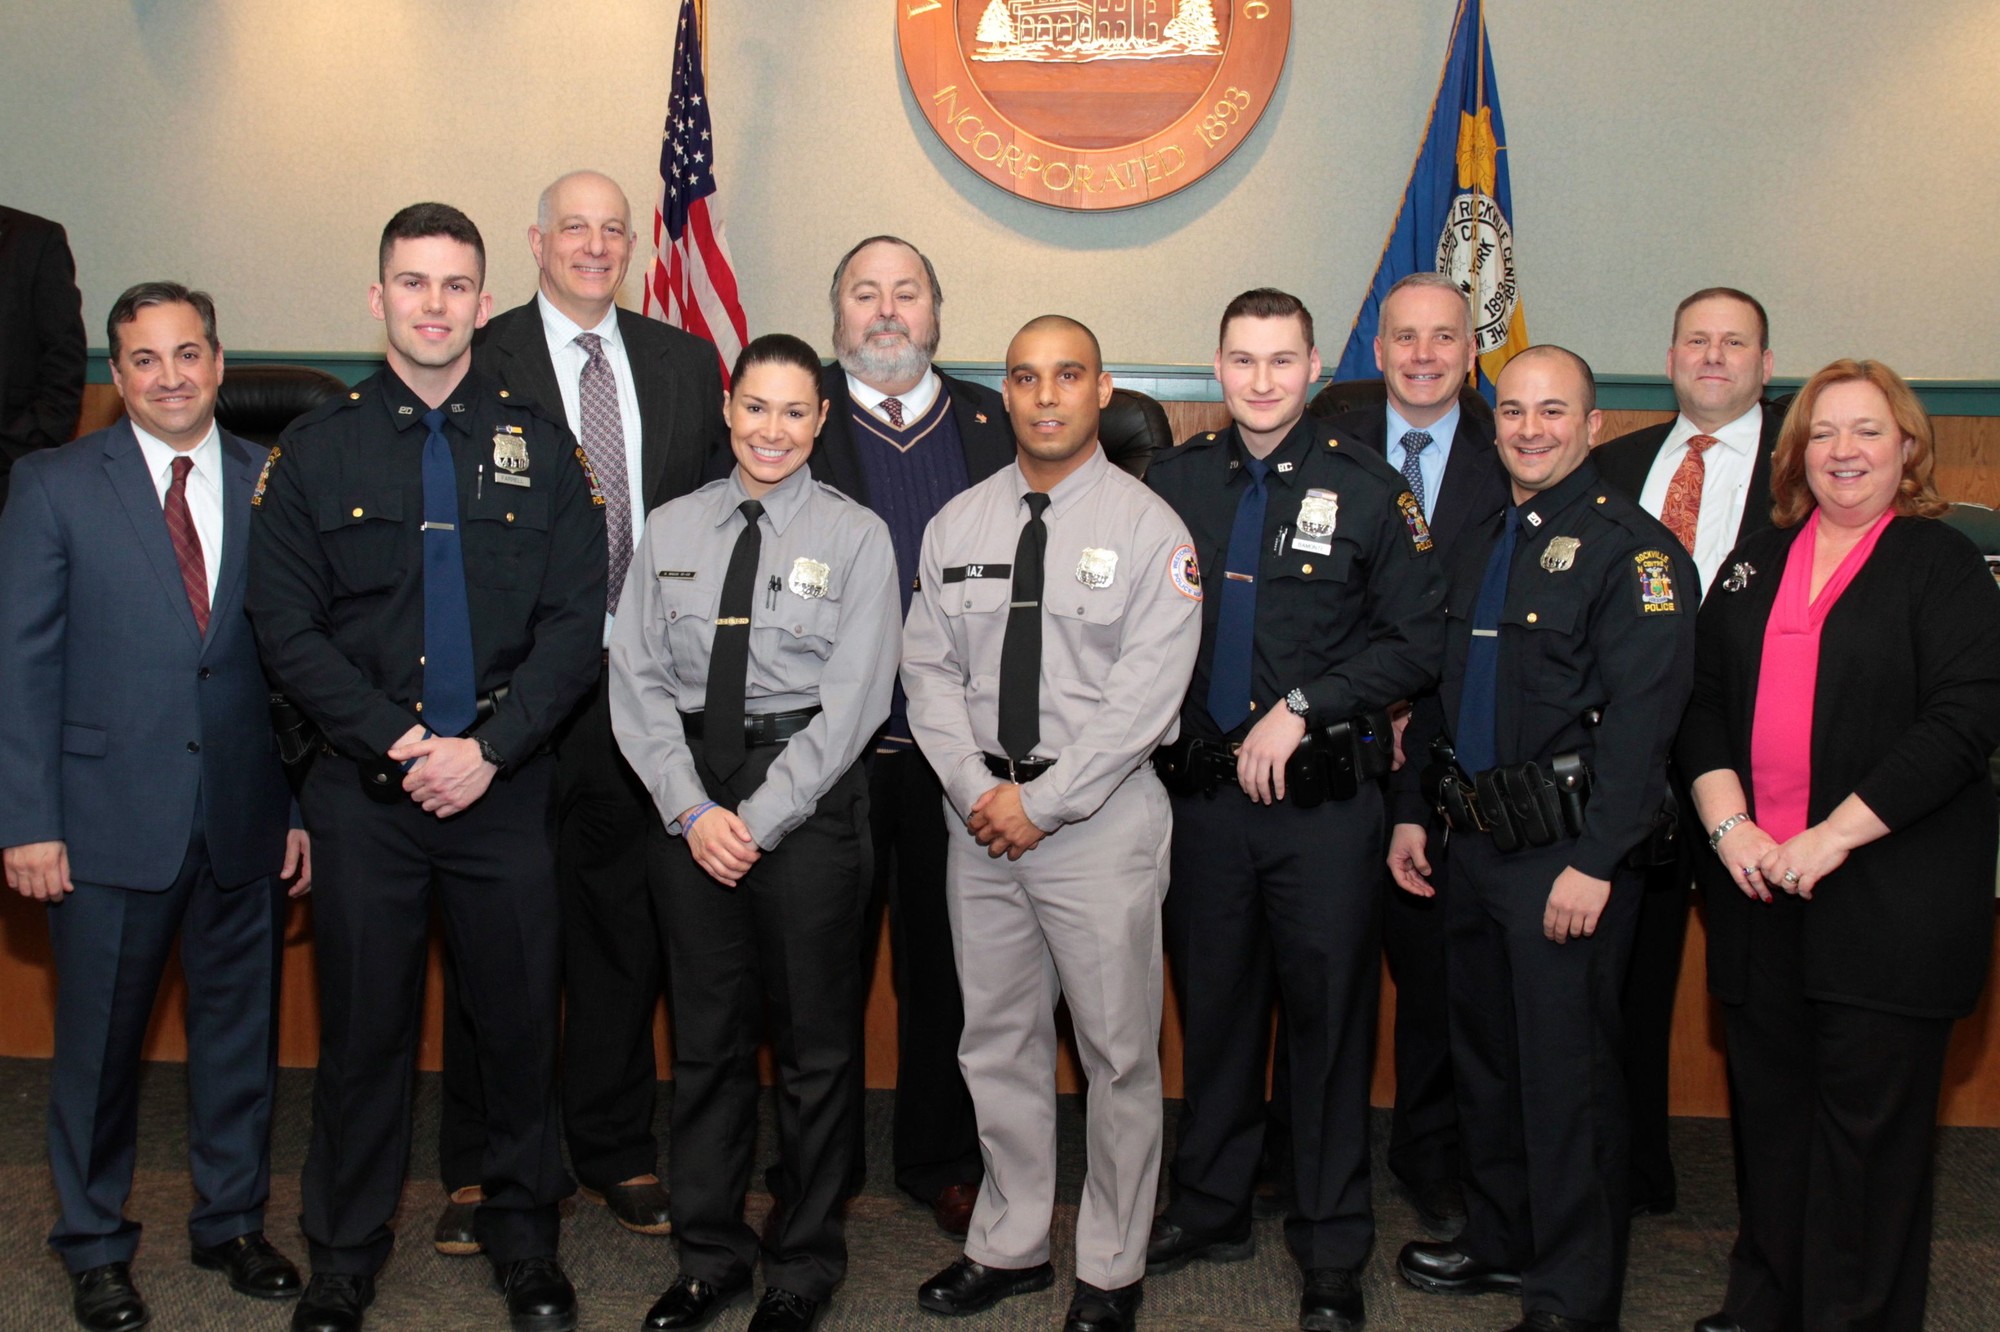 The Board of Trustees congratulated the newly sworn-in officers at the meeting on March 2. Pictured here, from left, are Trustee Michael Sepe, Officer Michael Farrell, Trustee Edward Oppenheimer, Officer Stefanie Balos, Mayor Francis X. Murray, Officer Jerremy Diaz, Officer Nicholas Bamonte, Trustee Emilio Grillo, Officer Kyle Coppola, Police Commissioner Charles Gennario and Deputy Mayor Nancy Howard.